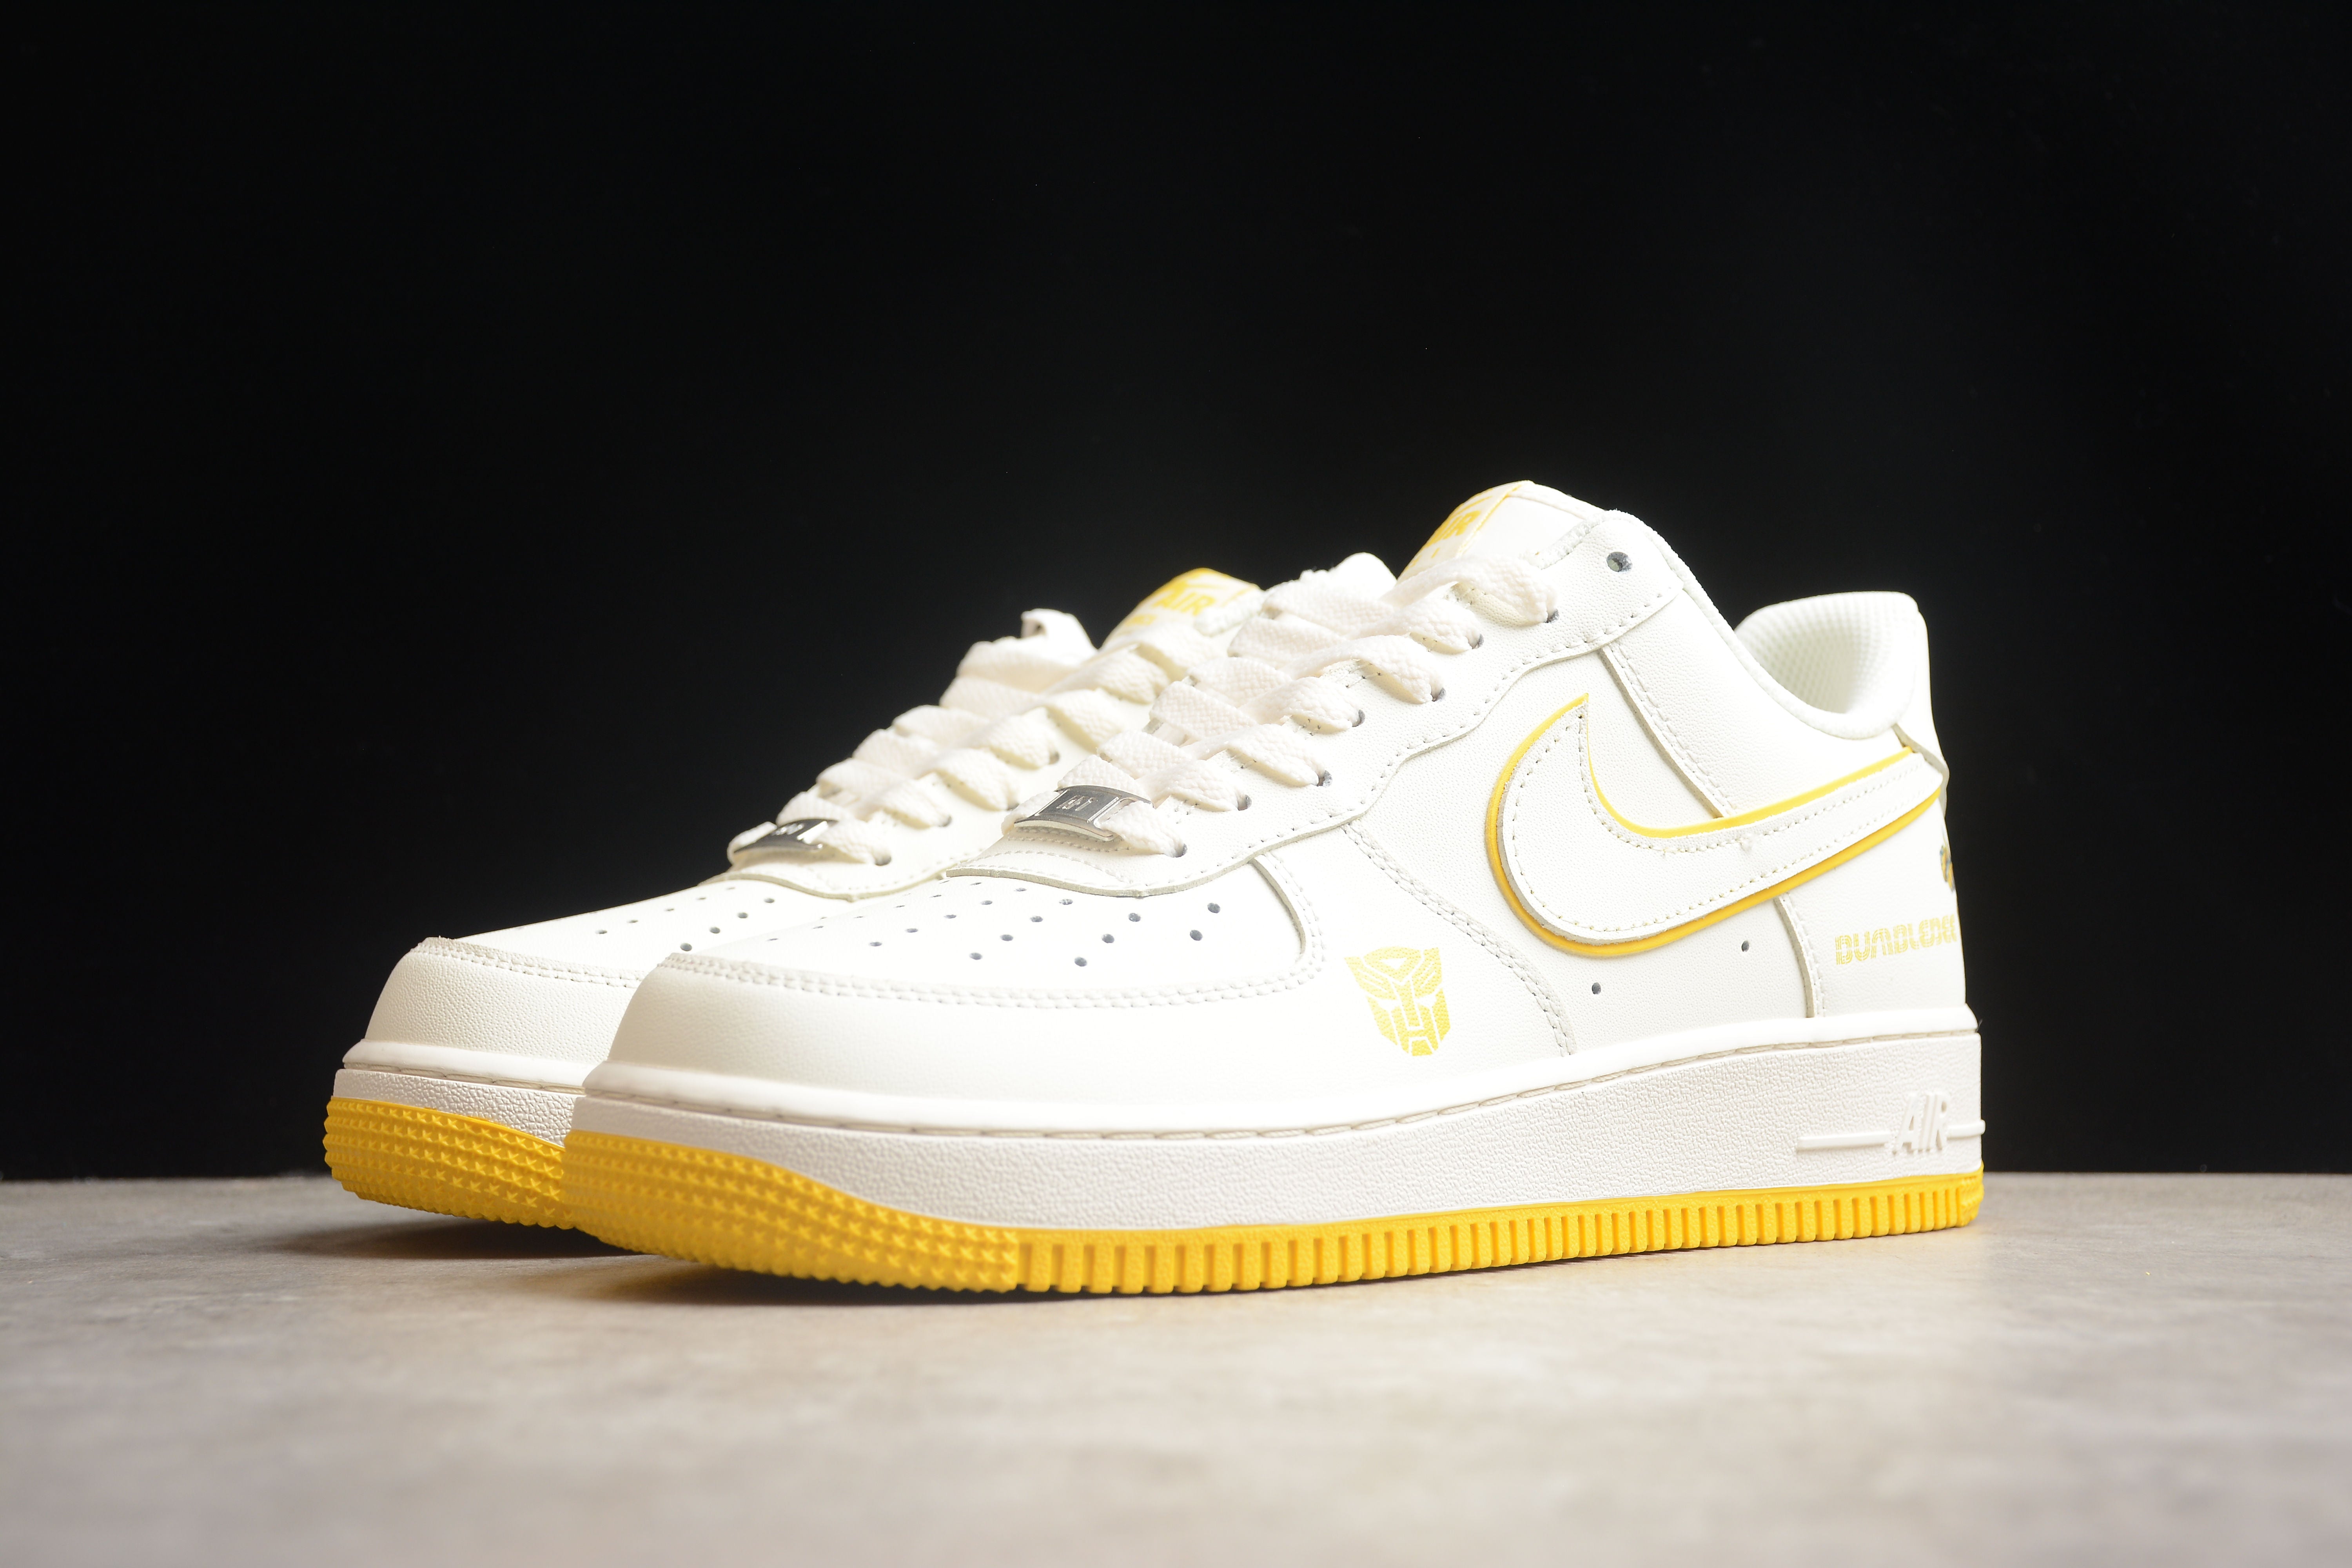 Nike airforce A1 transformers shoes